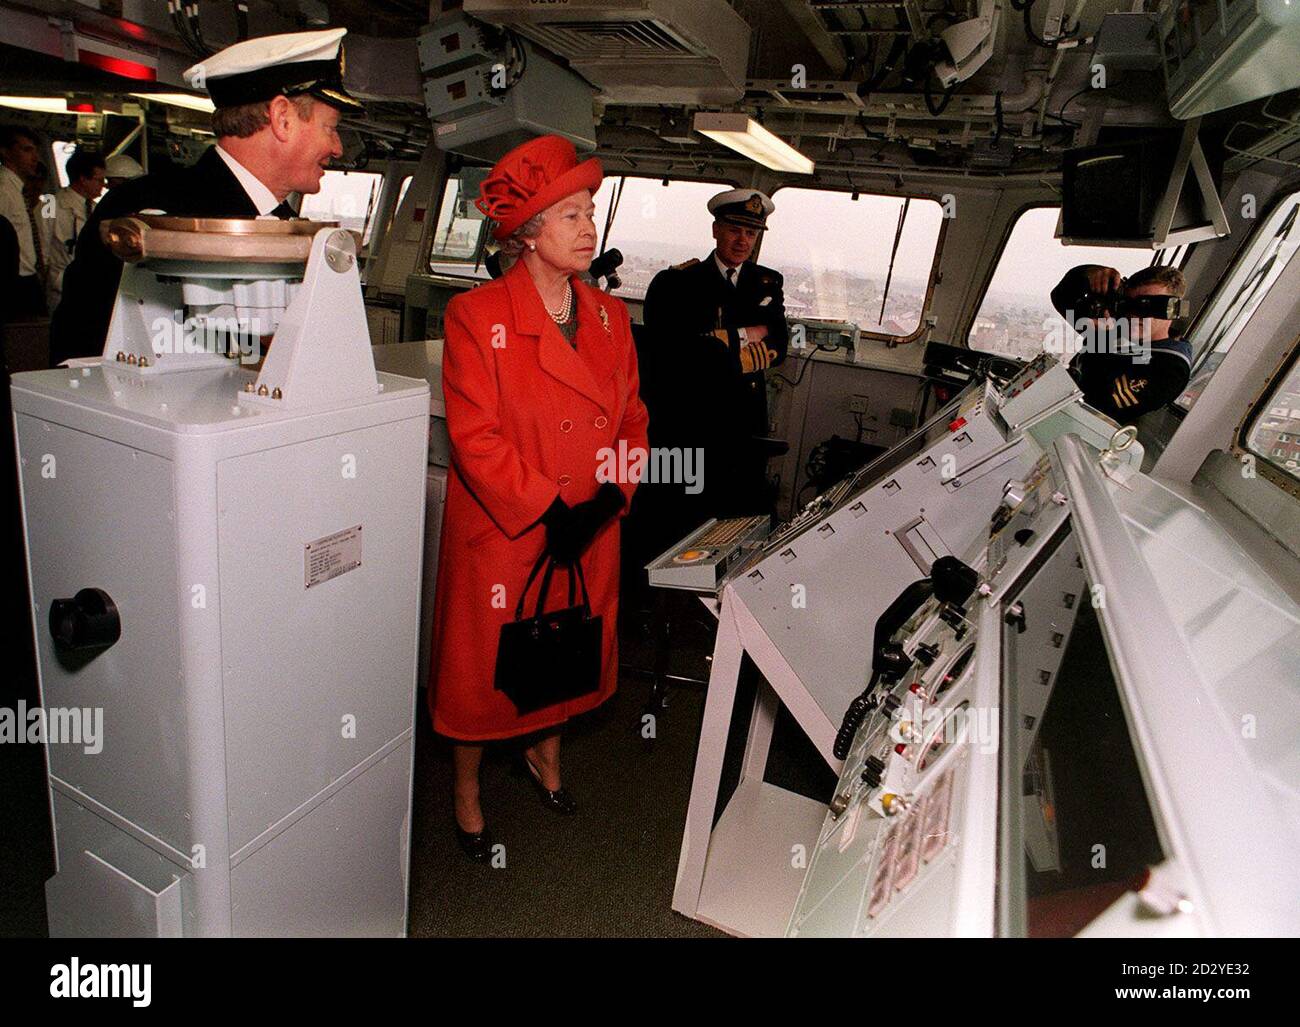 Her Majesty the Queen stands on tip toe to see over the bridge of the Royal Navy's newest and largest ship, HMS Ocean, during a tour prior to the formal naming ceremony at the VSEL Shipyard at Barrow in Furness today (Friday ). ROTA Photo John Giles/PA. Stock Photo